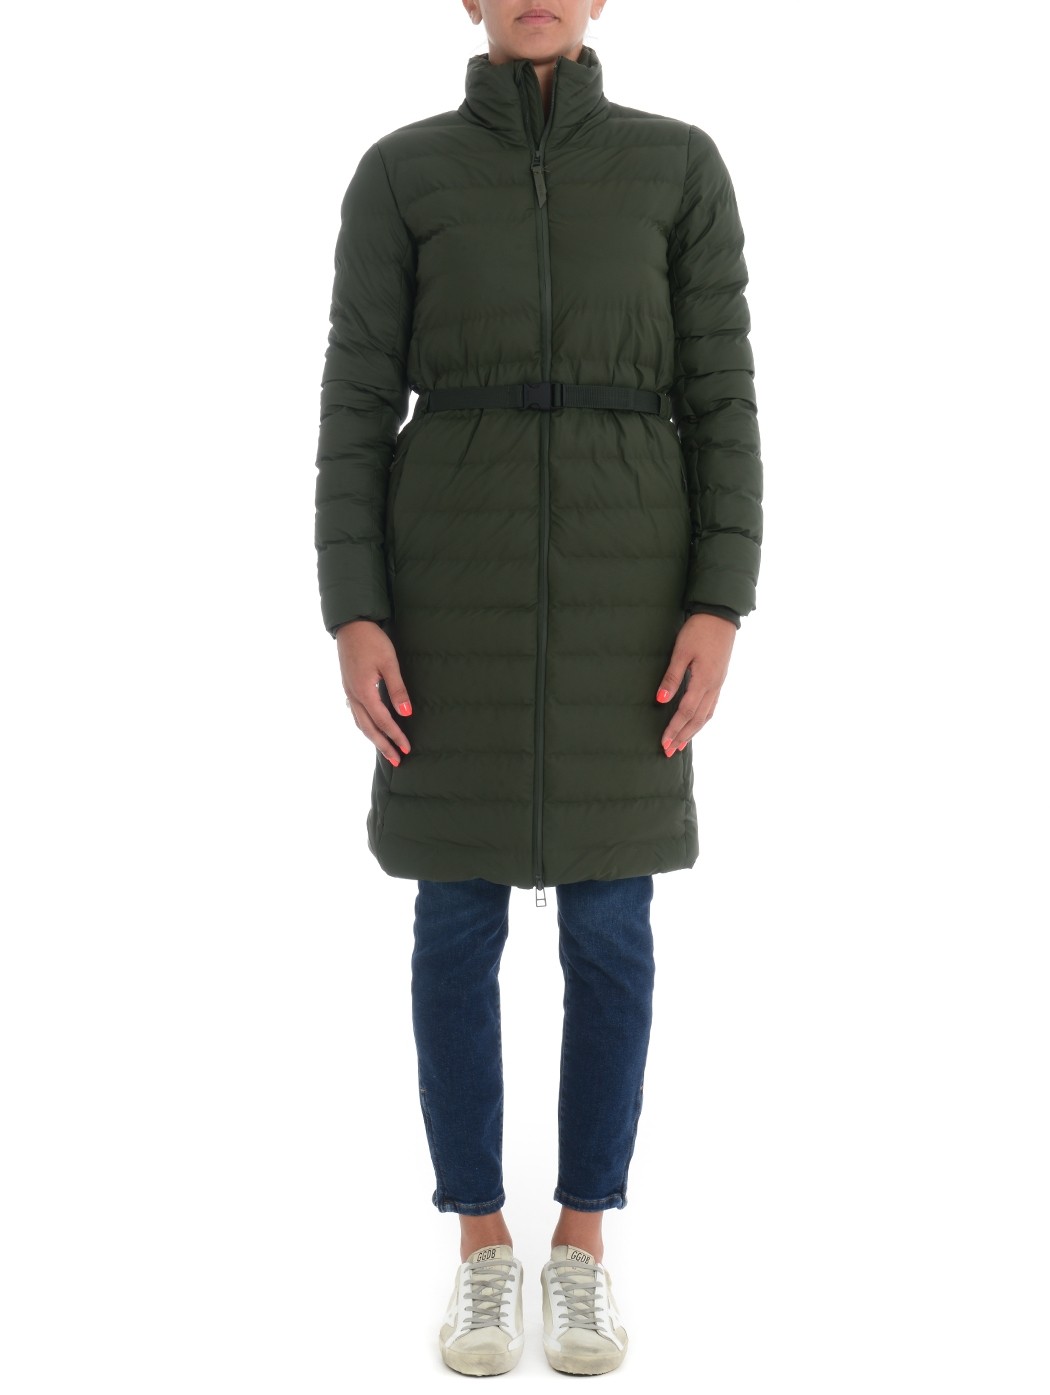  down jackets,removable hoods,WOMEN DOWN JACKETS,MONCLER PADDED JACKETS,WOOLRICH ARCTIC PARKA,HERNO DOWN JACKETS  RAINS TREKKER-COAT